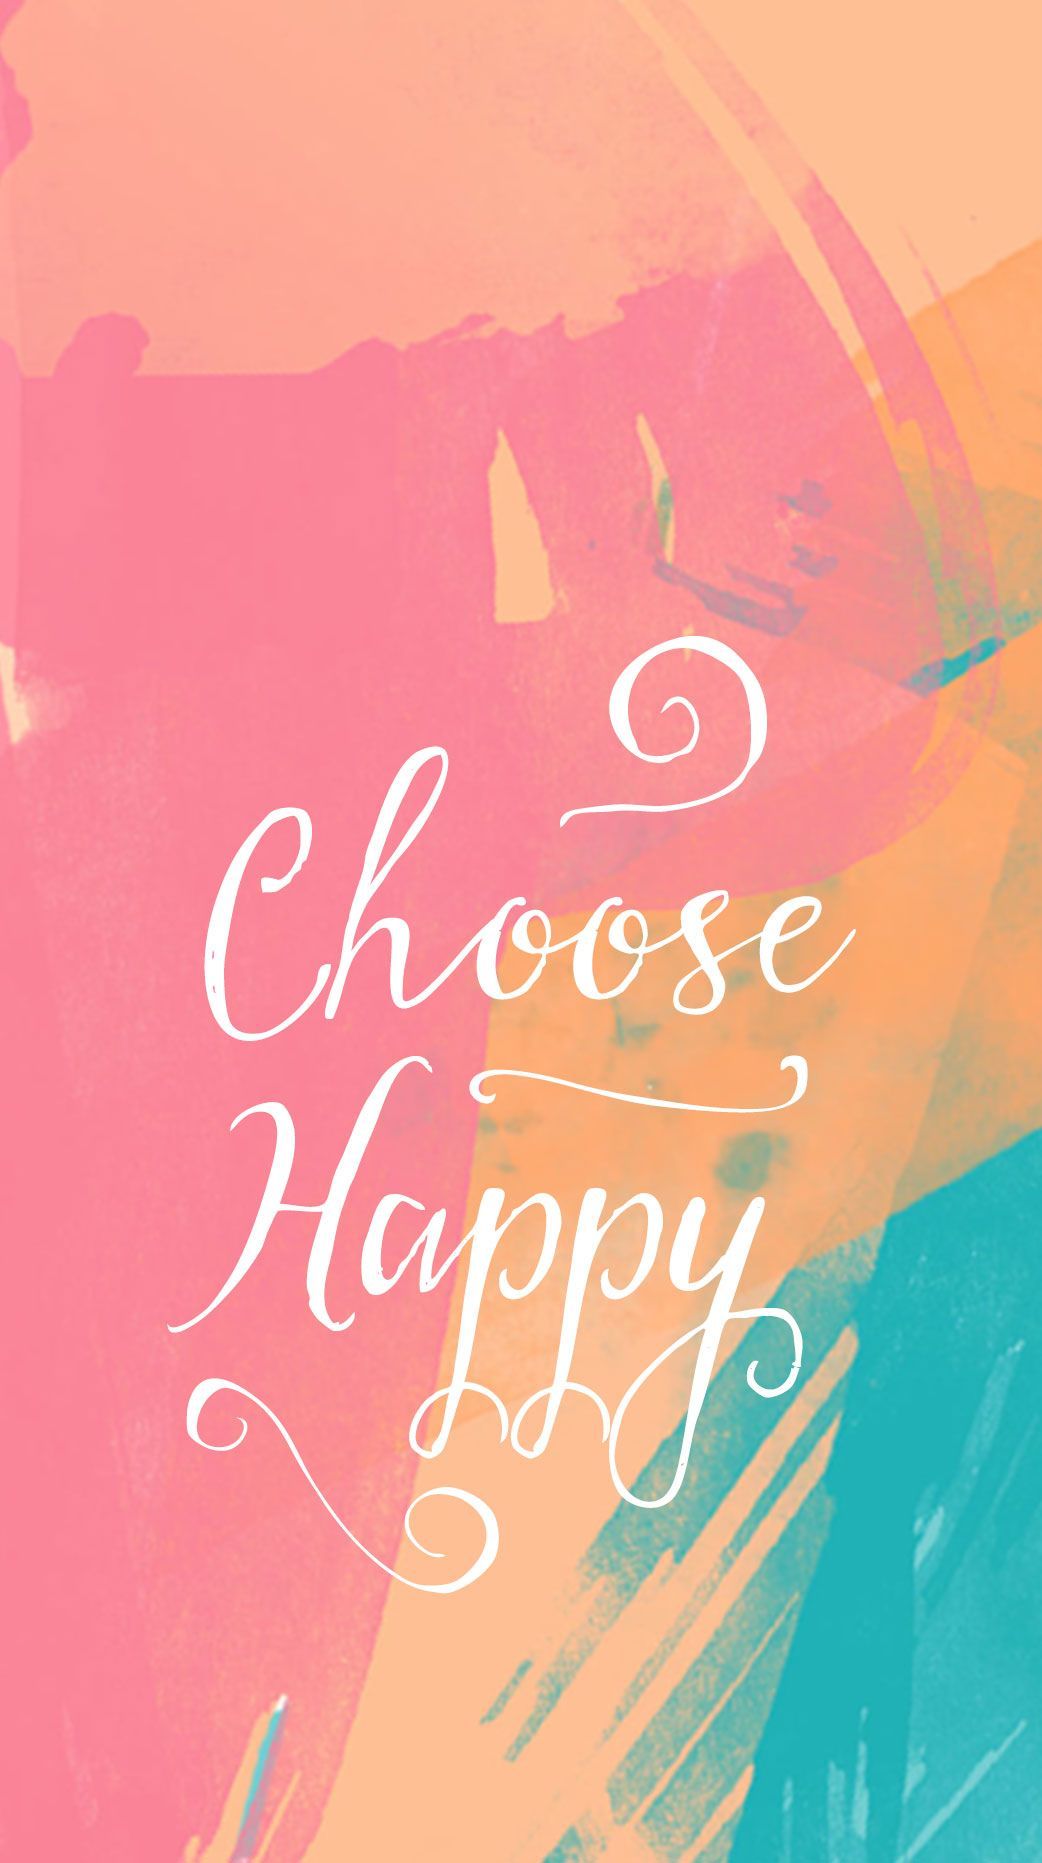 Happy Quotes iPhone Wallpapers on WallpaperDog